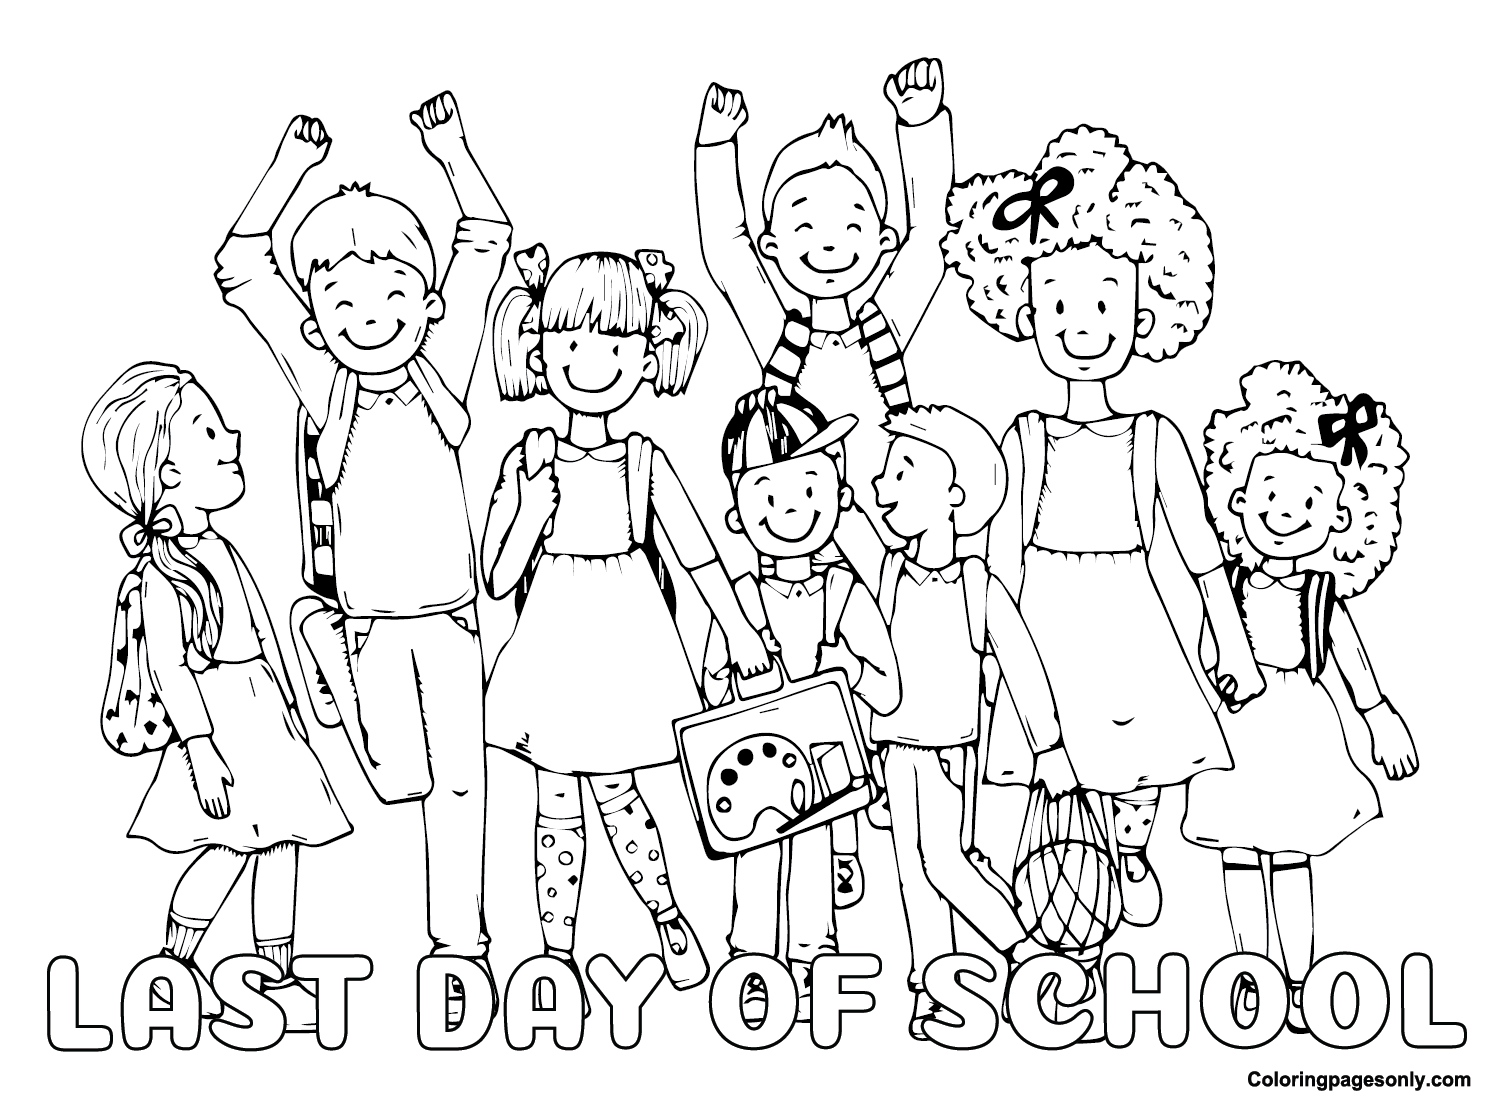 Children in Last Day of School Coloring Page